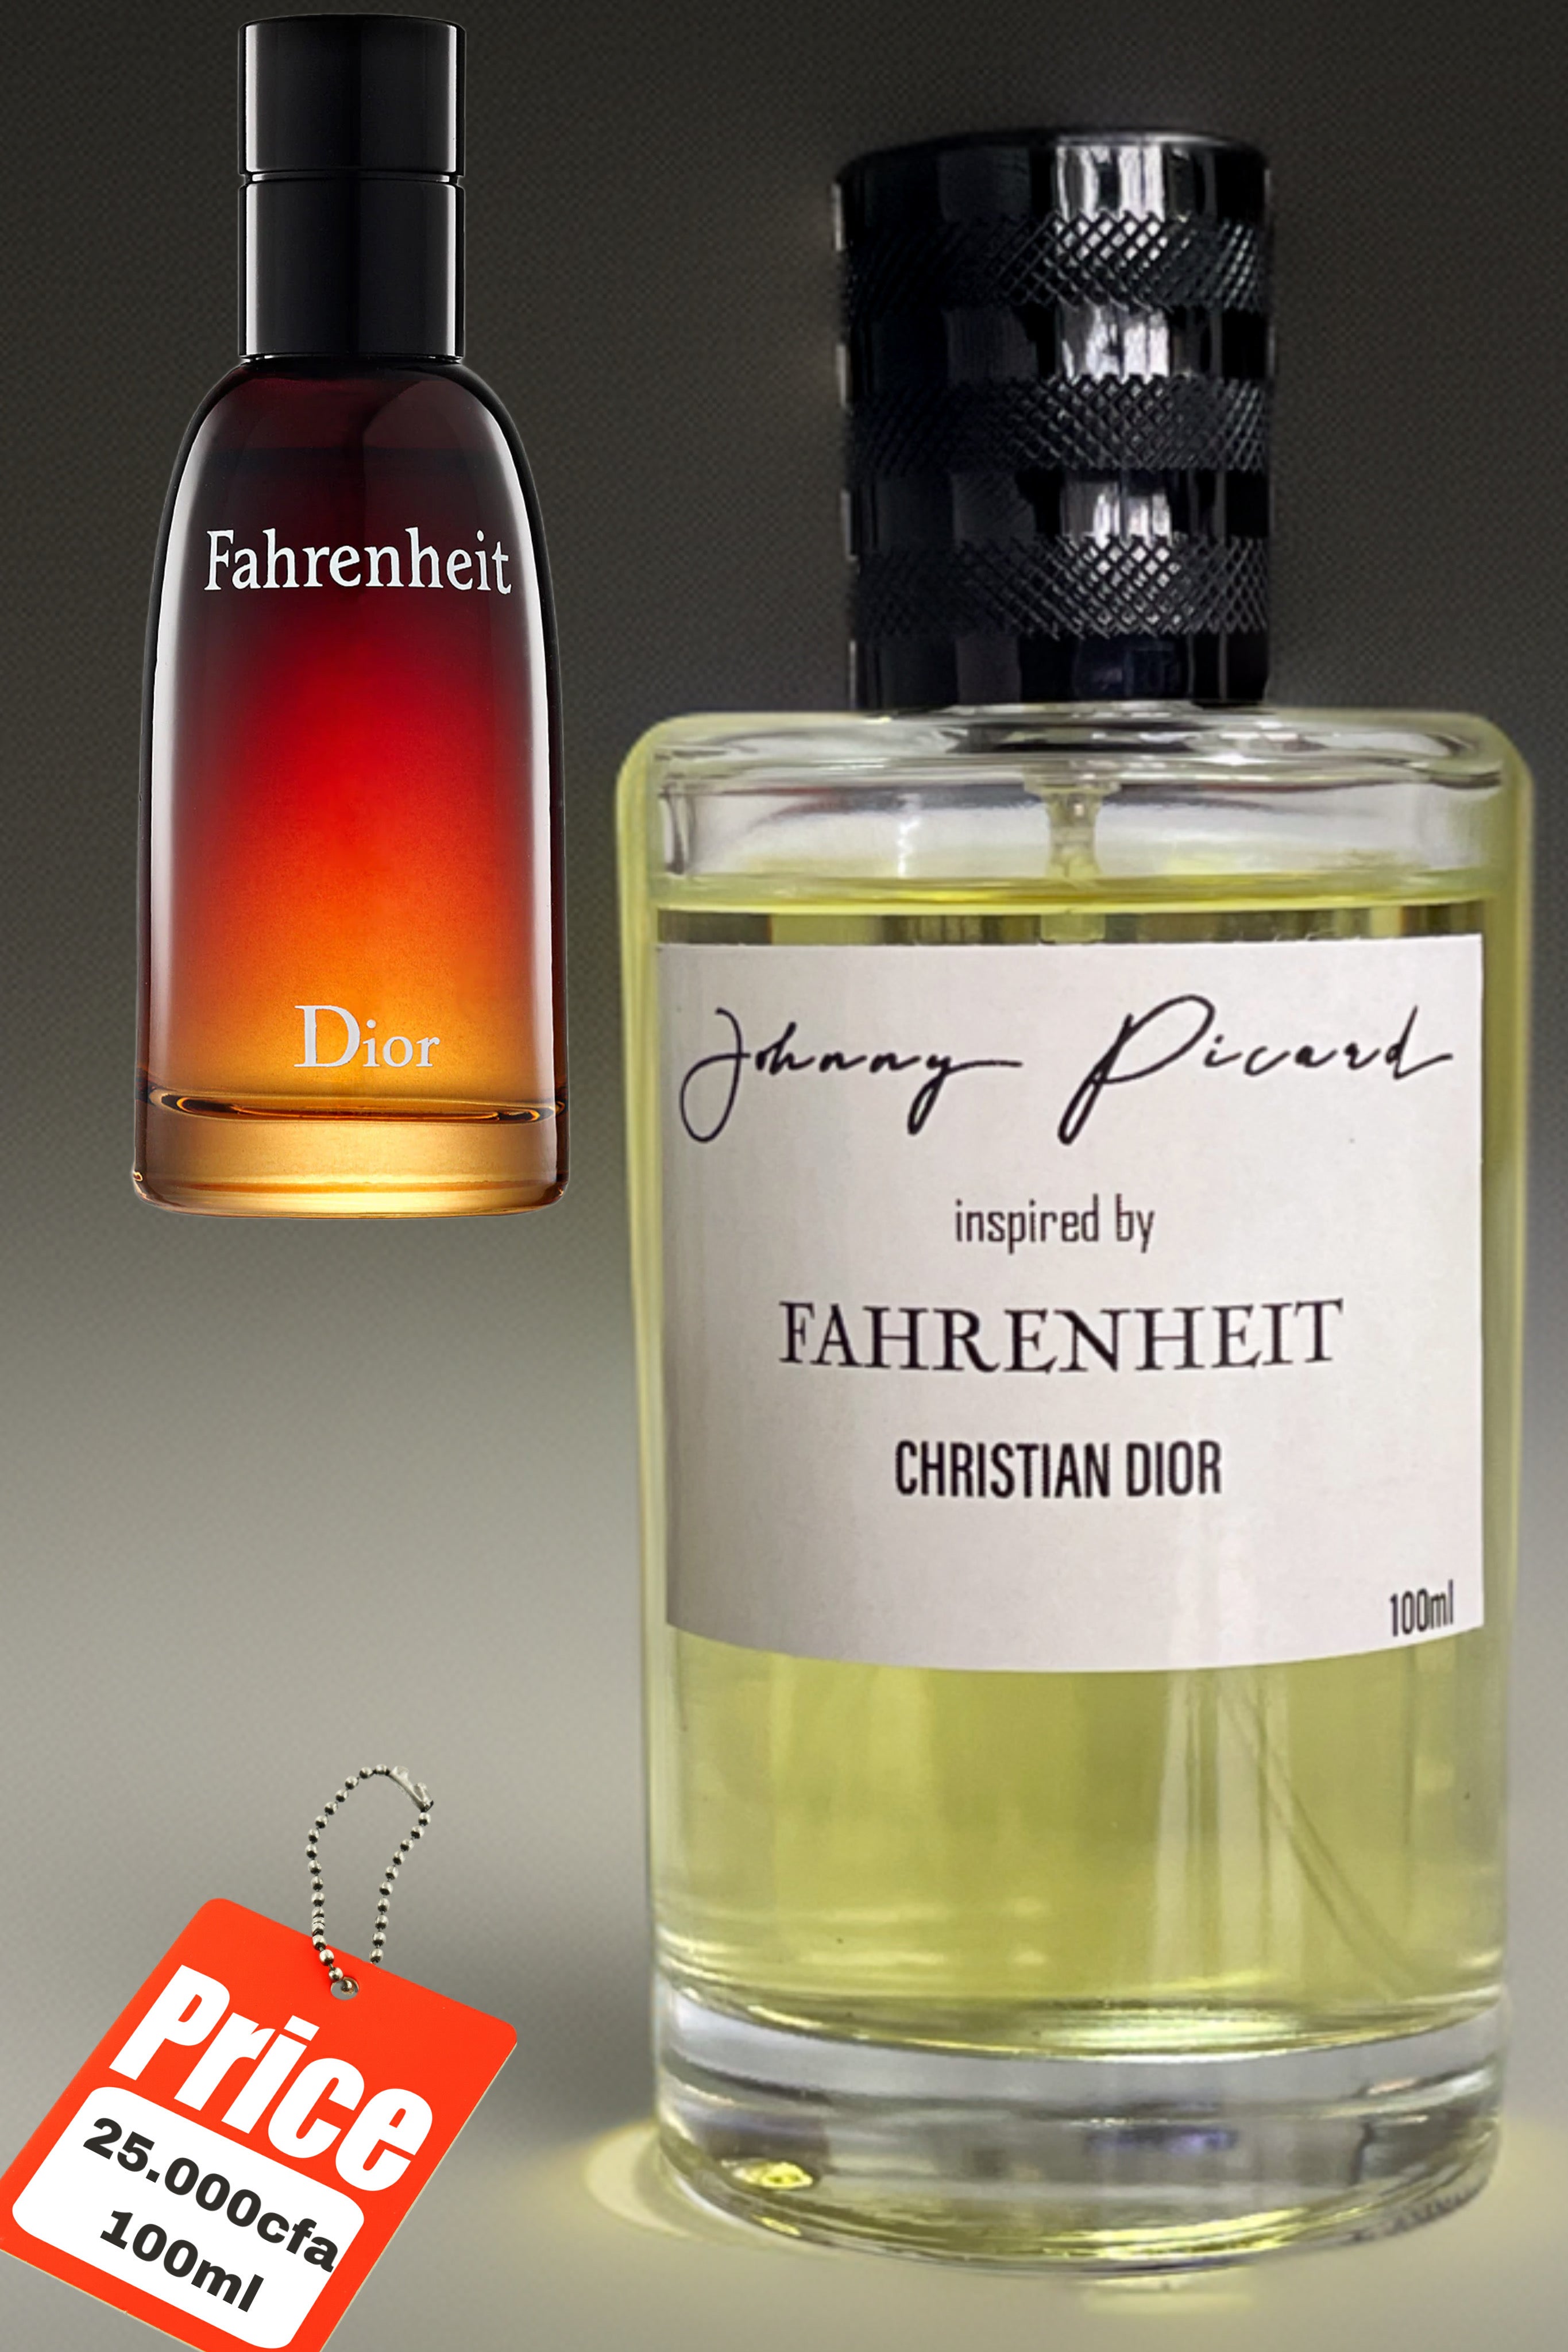 Johnny picard inspired by Fahrenheit  CHRISTIAN DIOR